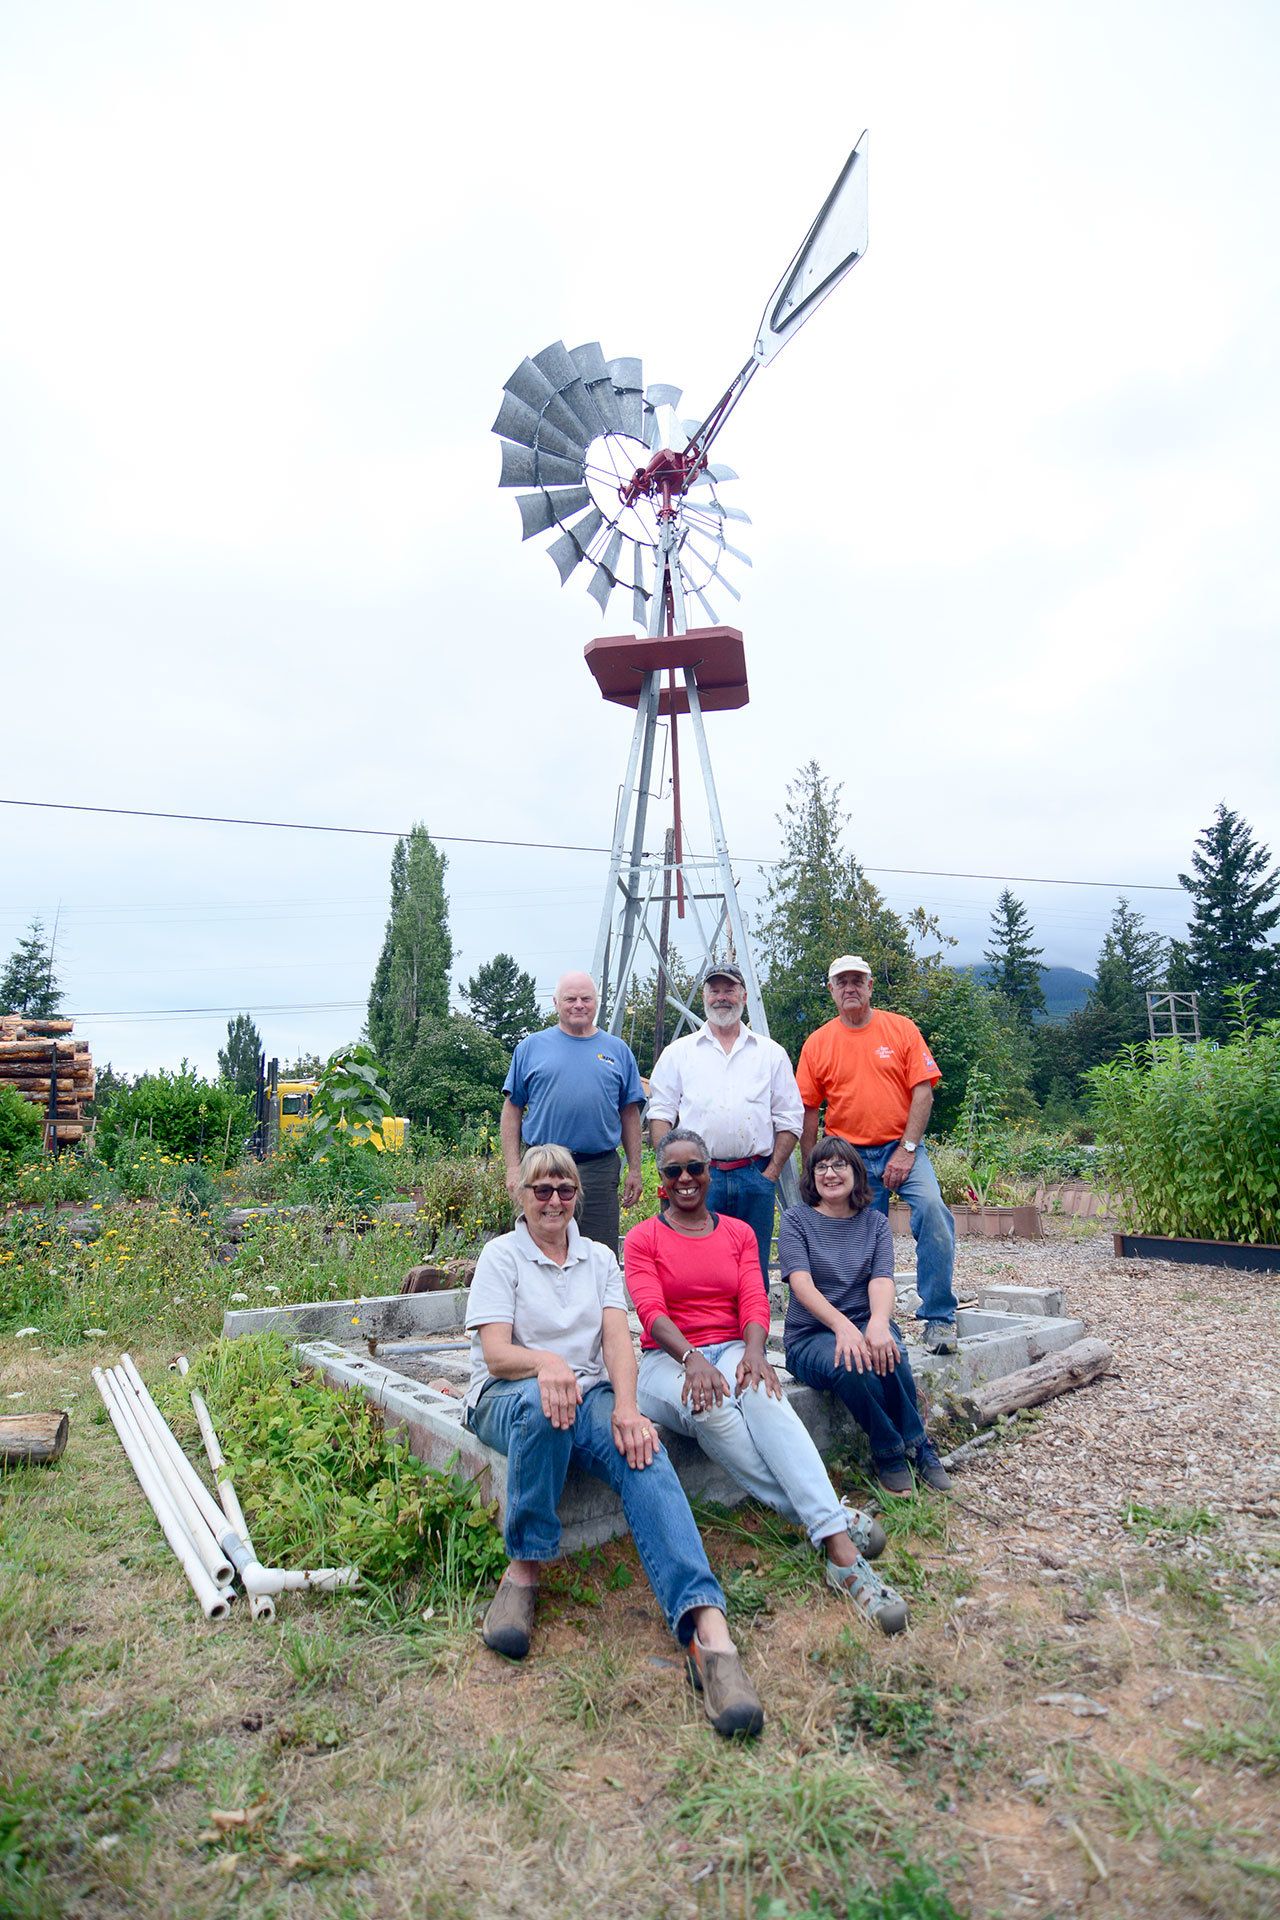 A windmill was erected Wednesday at Quilcene’s Q Gardens. In back, from left, are Bill Scott, Scott Abbott and Tim O’Neill. In front, from left, are Anne Ricker, Leslie Bunton and Juanita Thomas. (Jesse Major/Peninsula Daily News)